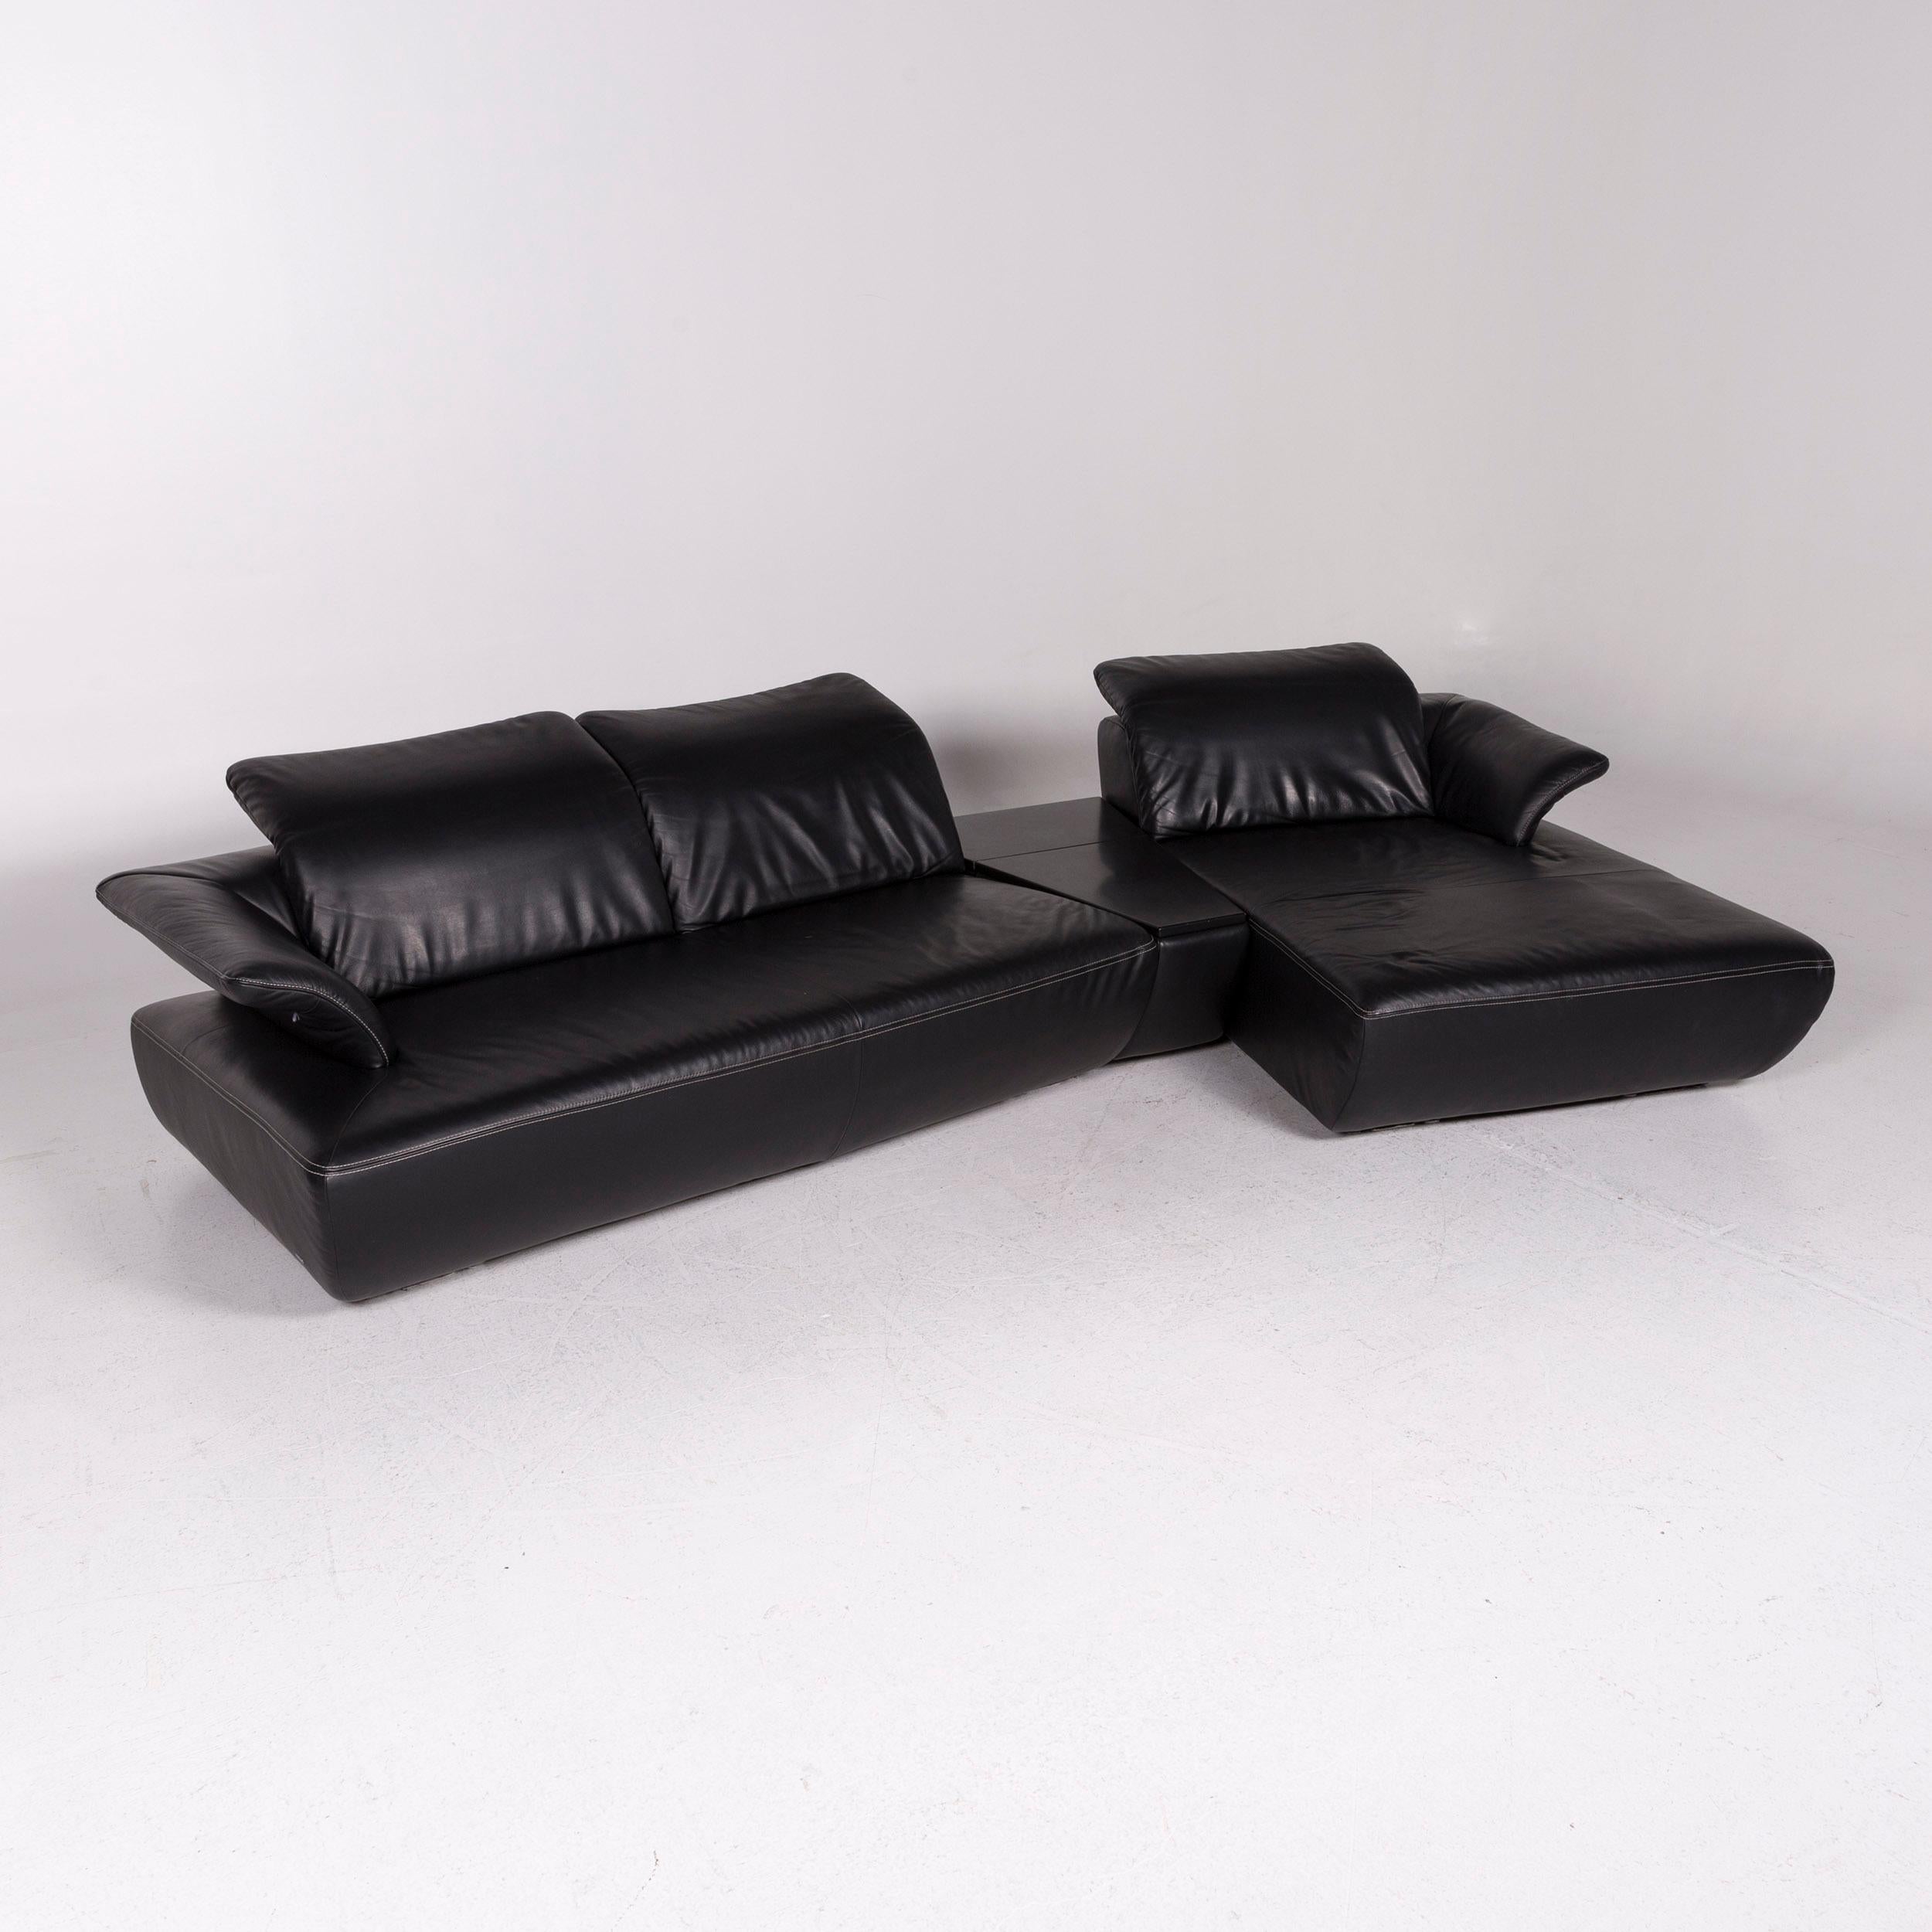 We bring to you a Koinor Avanti leather sofa set black 1 corner sofa 1 stool function.


 Product measurements in centimeters:
 

Depth 117
Width 363
Height 76
Seat-height 44
Rest-height 65
Seat-depth 52
Seat-width 185
Back-height 39.
 